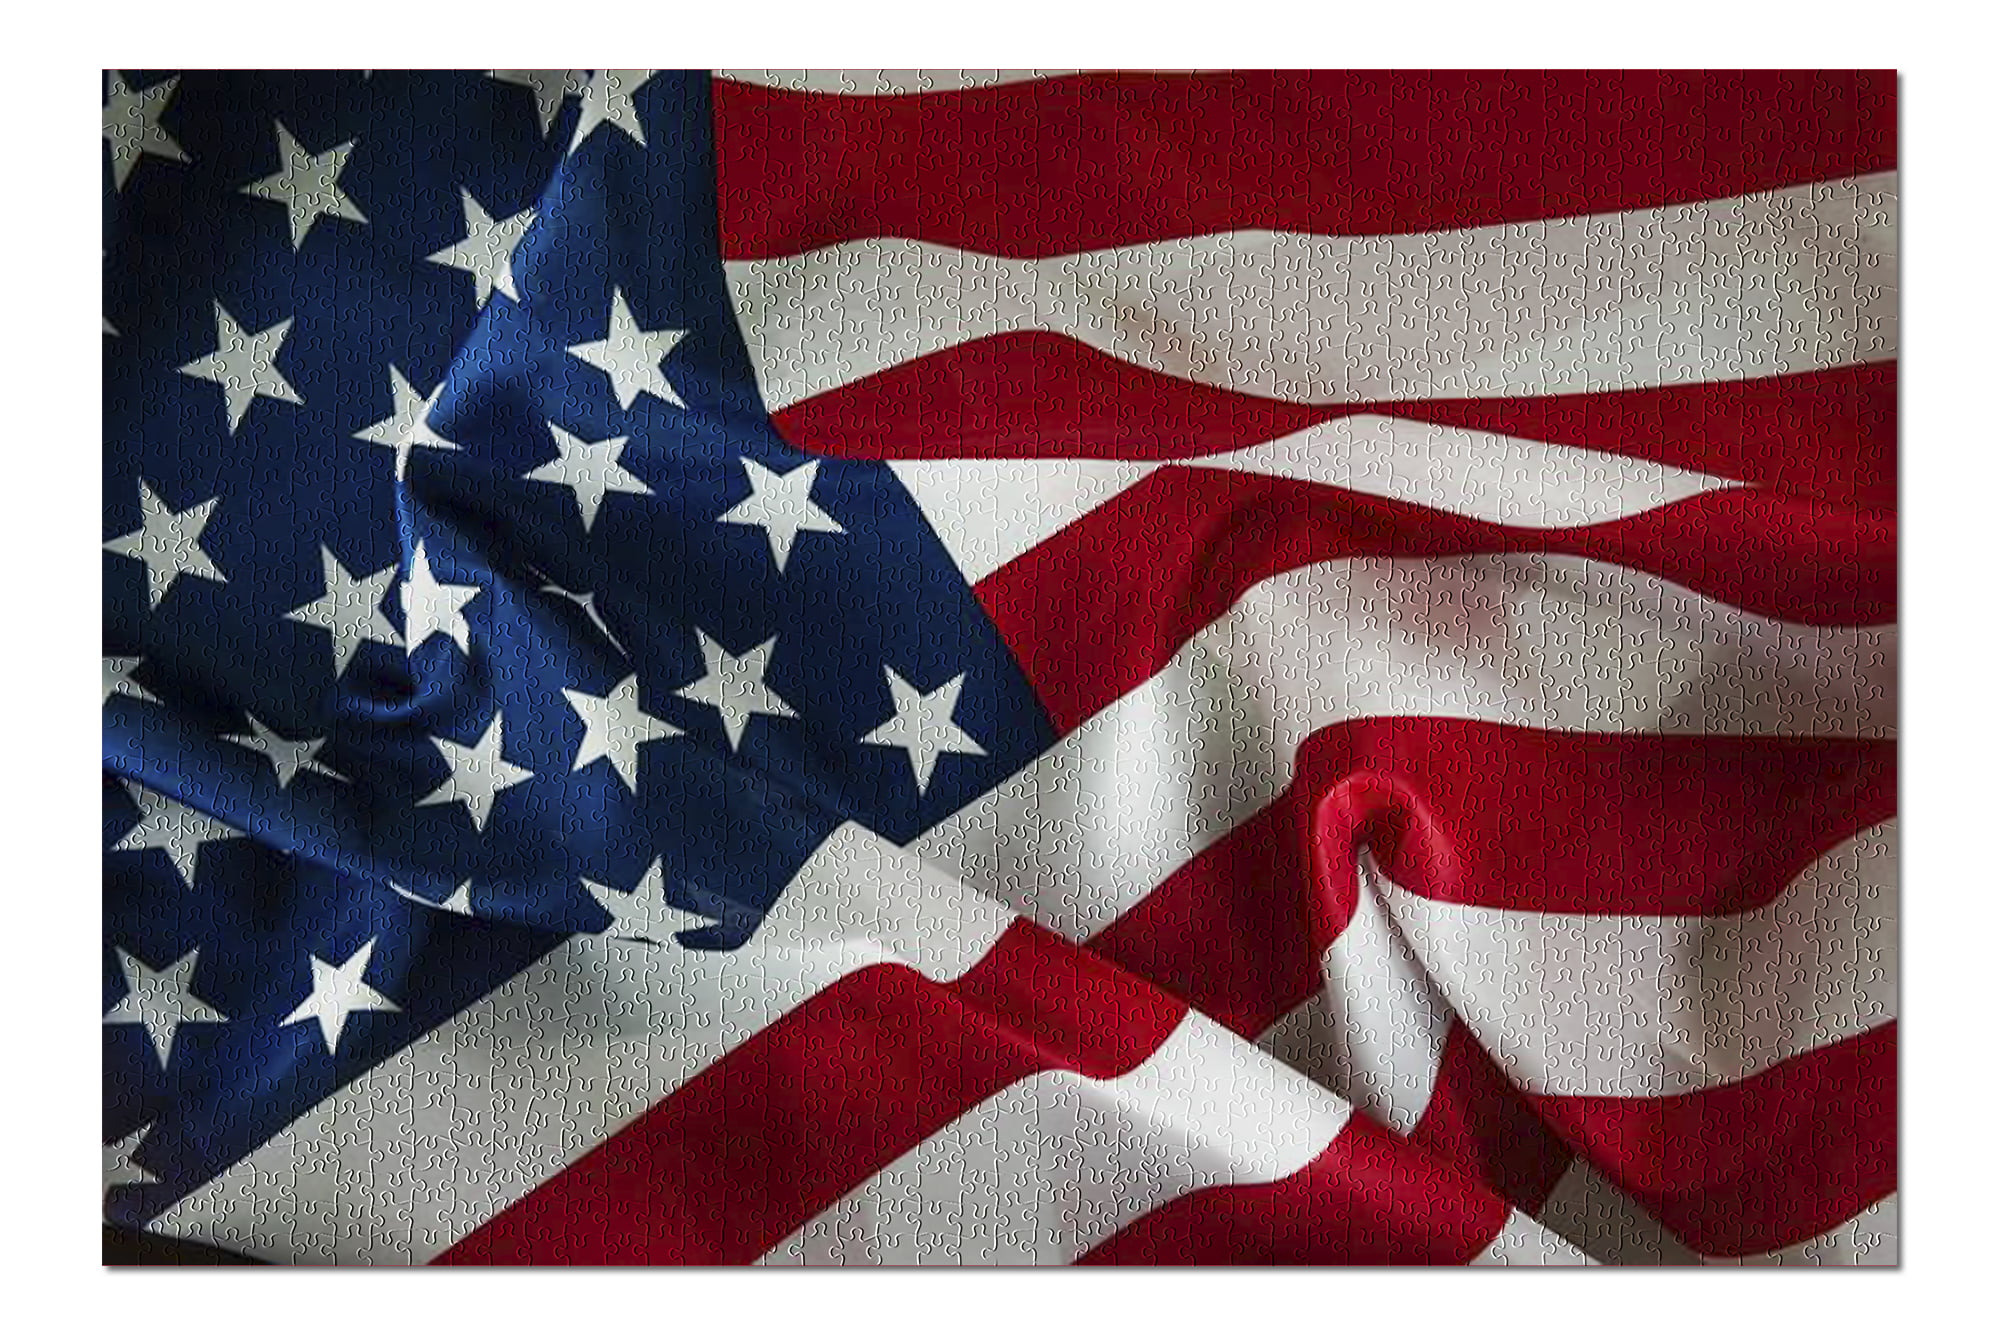 Close Up of Ruffled United States Flag 9013241 (20x30 Premium 1000 Piece Jigsaw Puzzle, Made in USA!)